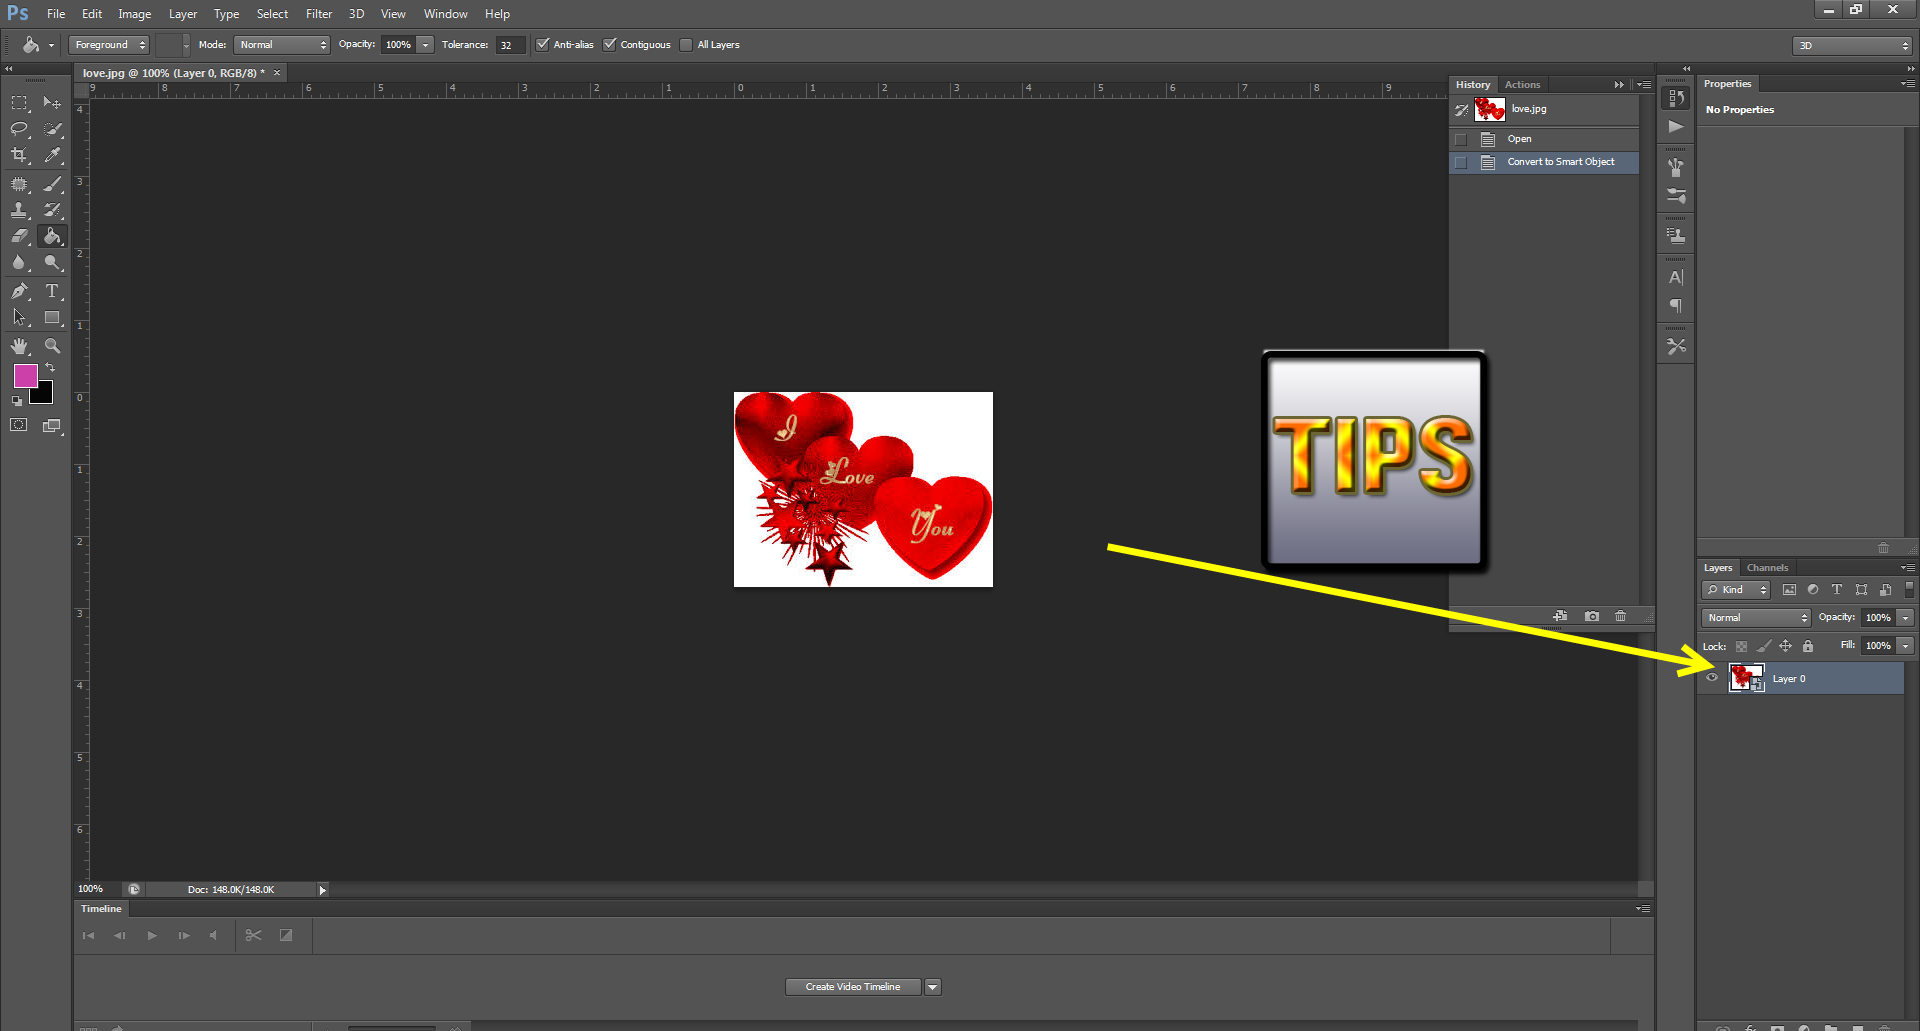 How to Resize Images without Losing Quality - Webzone Tech Tips - Zidane